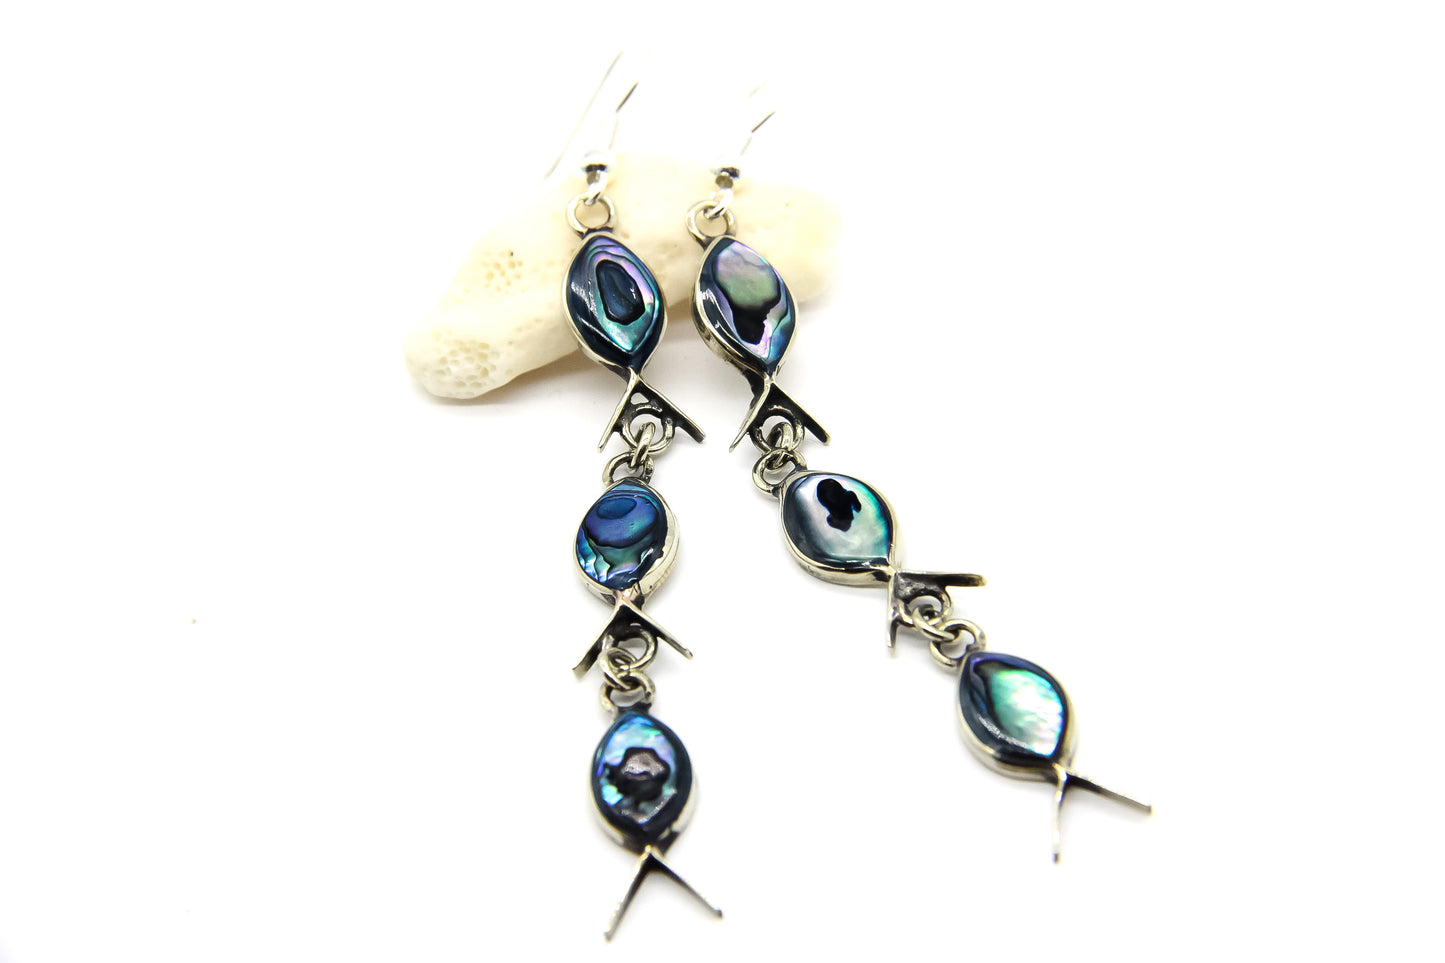 Silver drop earrings in the shape of fish with iridescent blue shell inlay